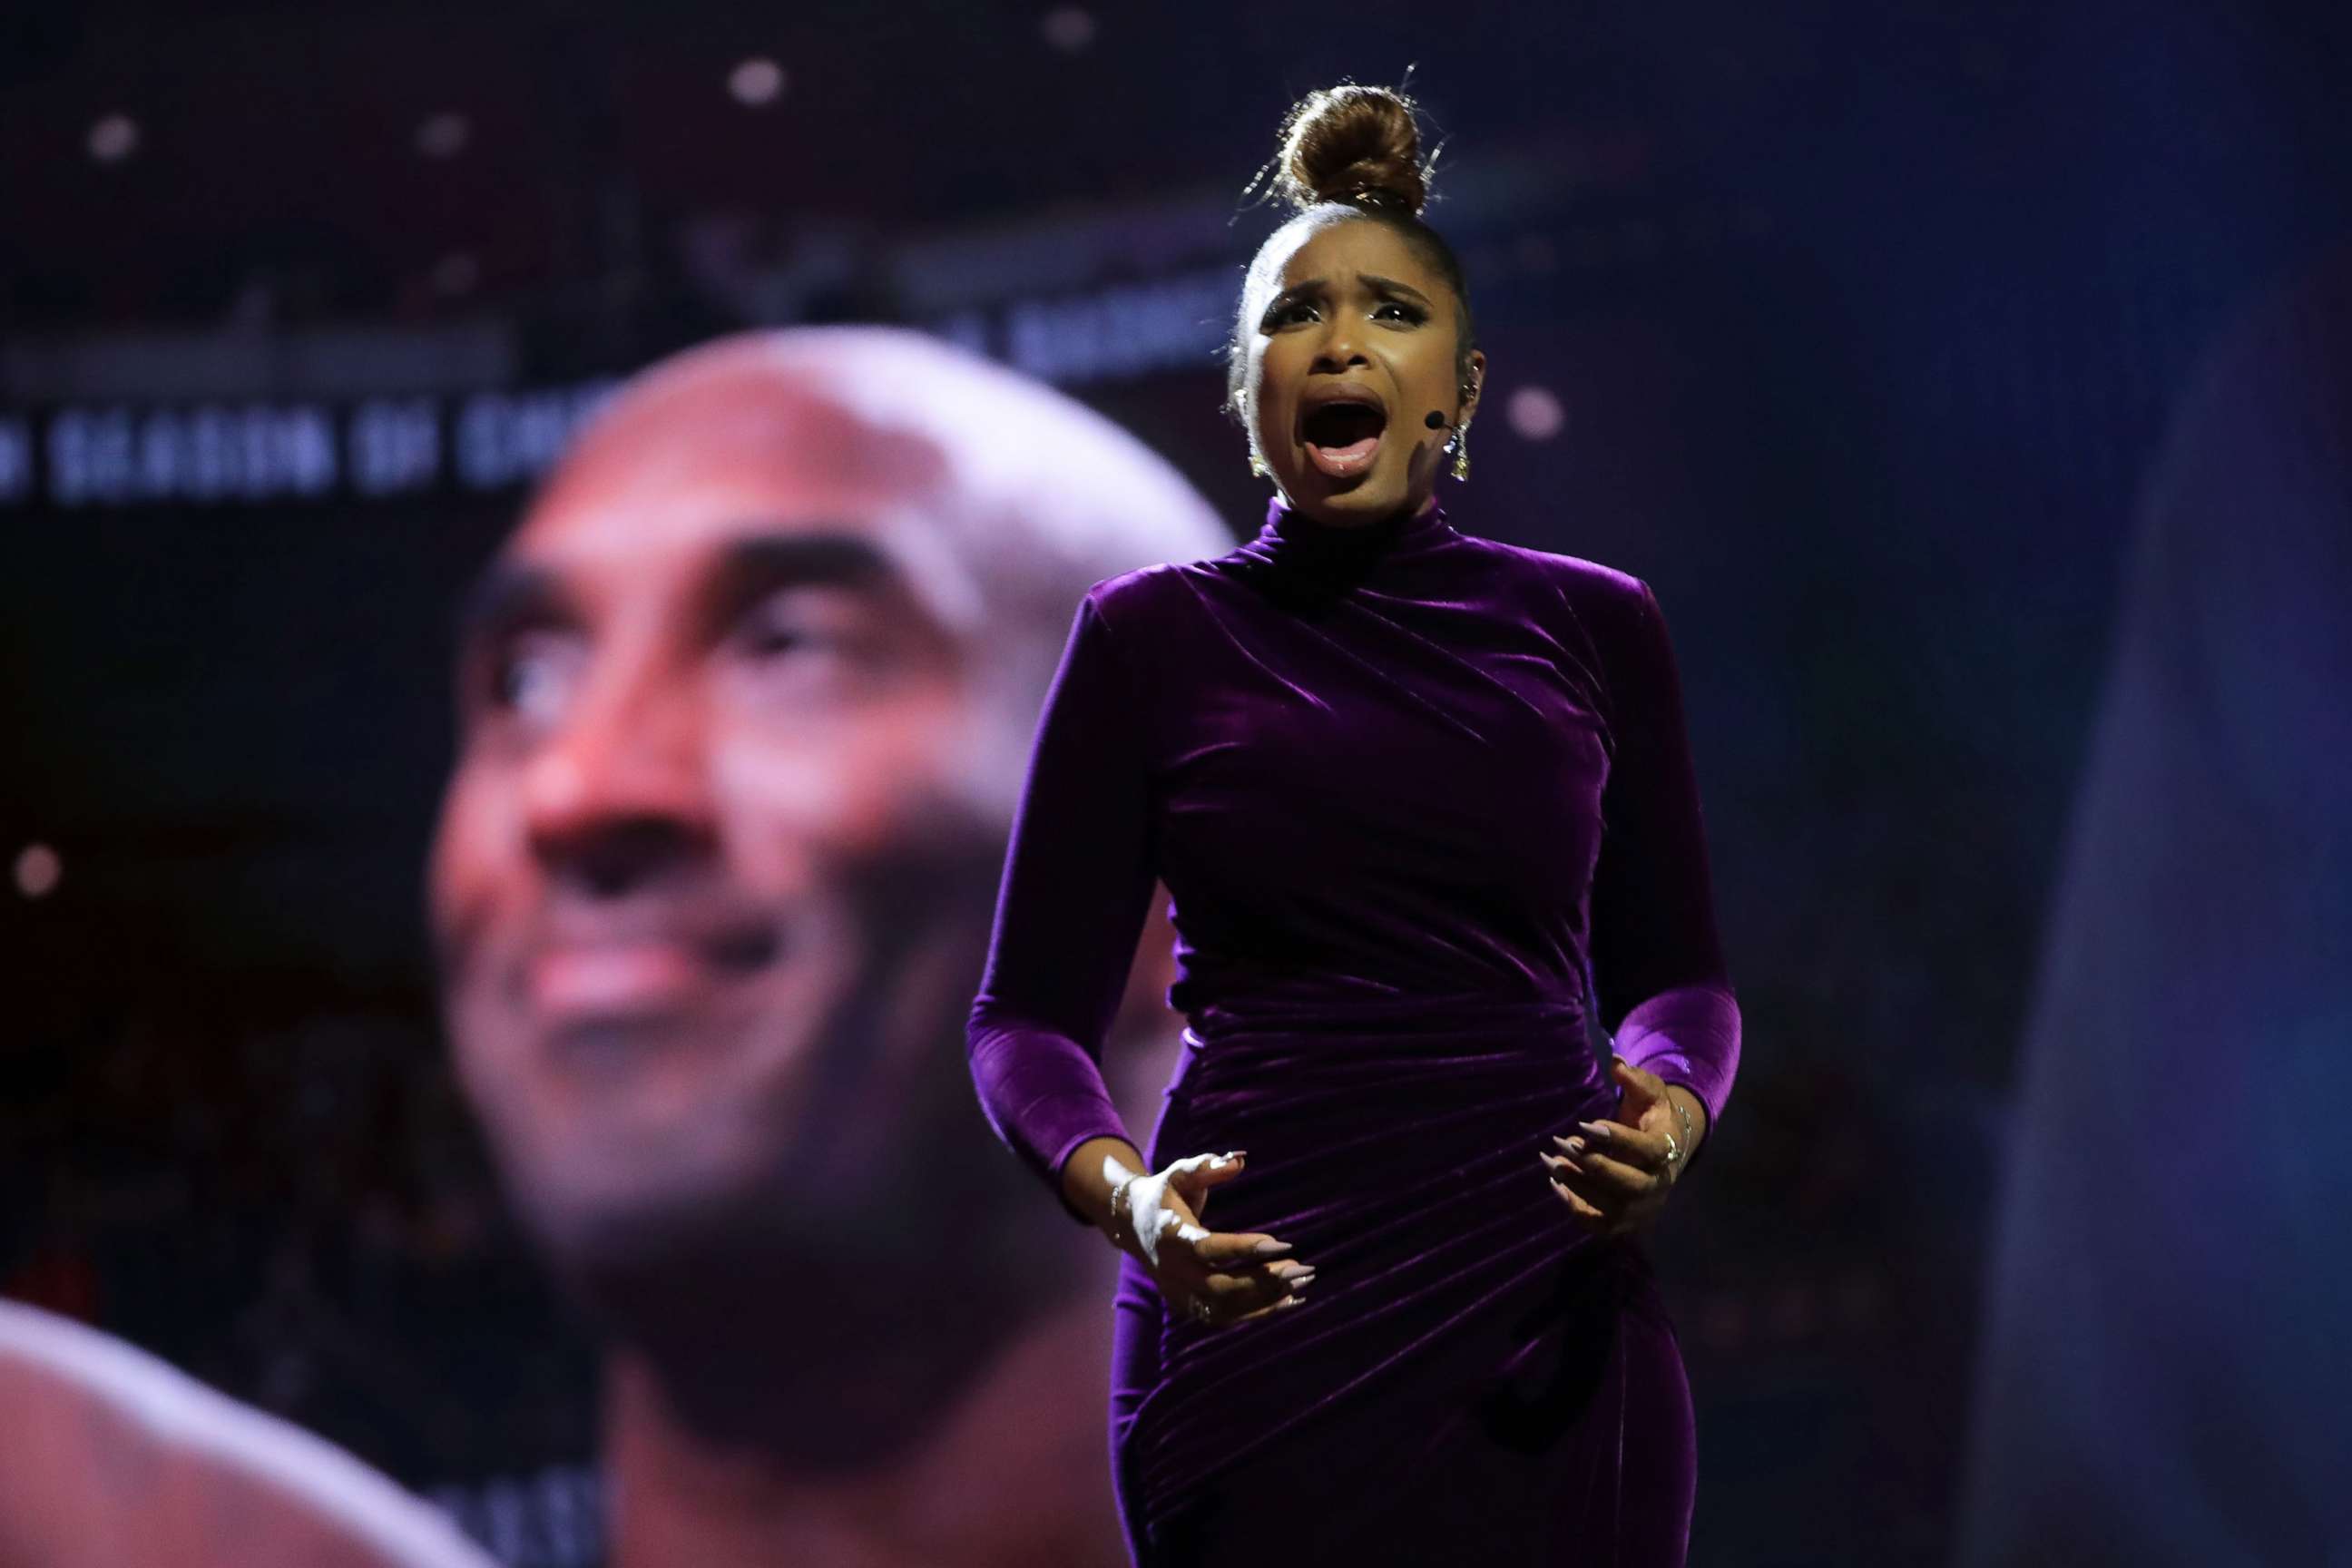 PHOTO: Jennifer Hudson performs a tribute to Kobe Bryant before the NBA All-Star Game at the United Center, Feb. 16, 2020, in Chicago.